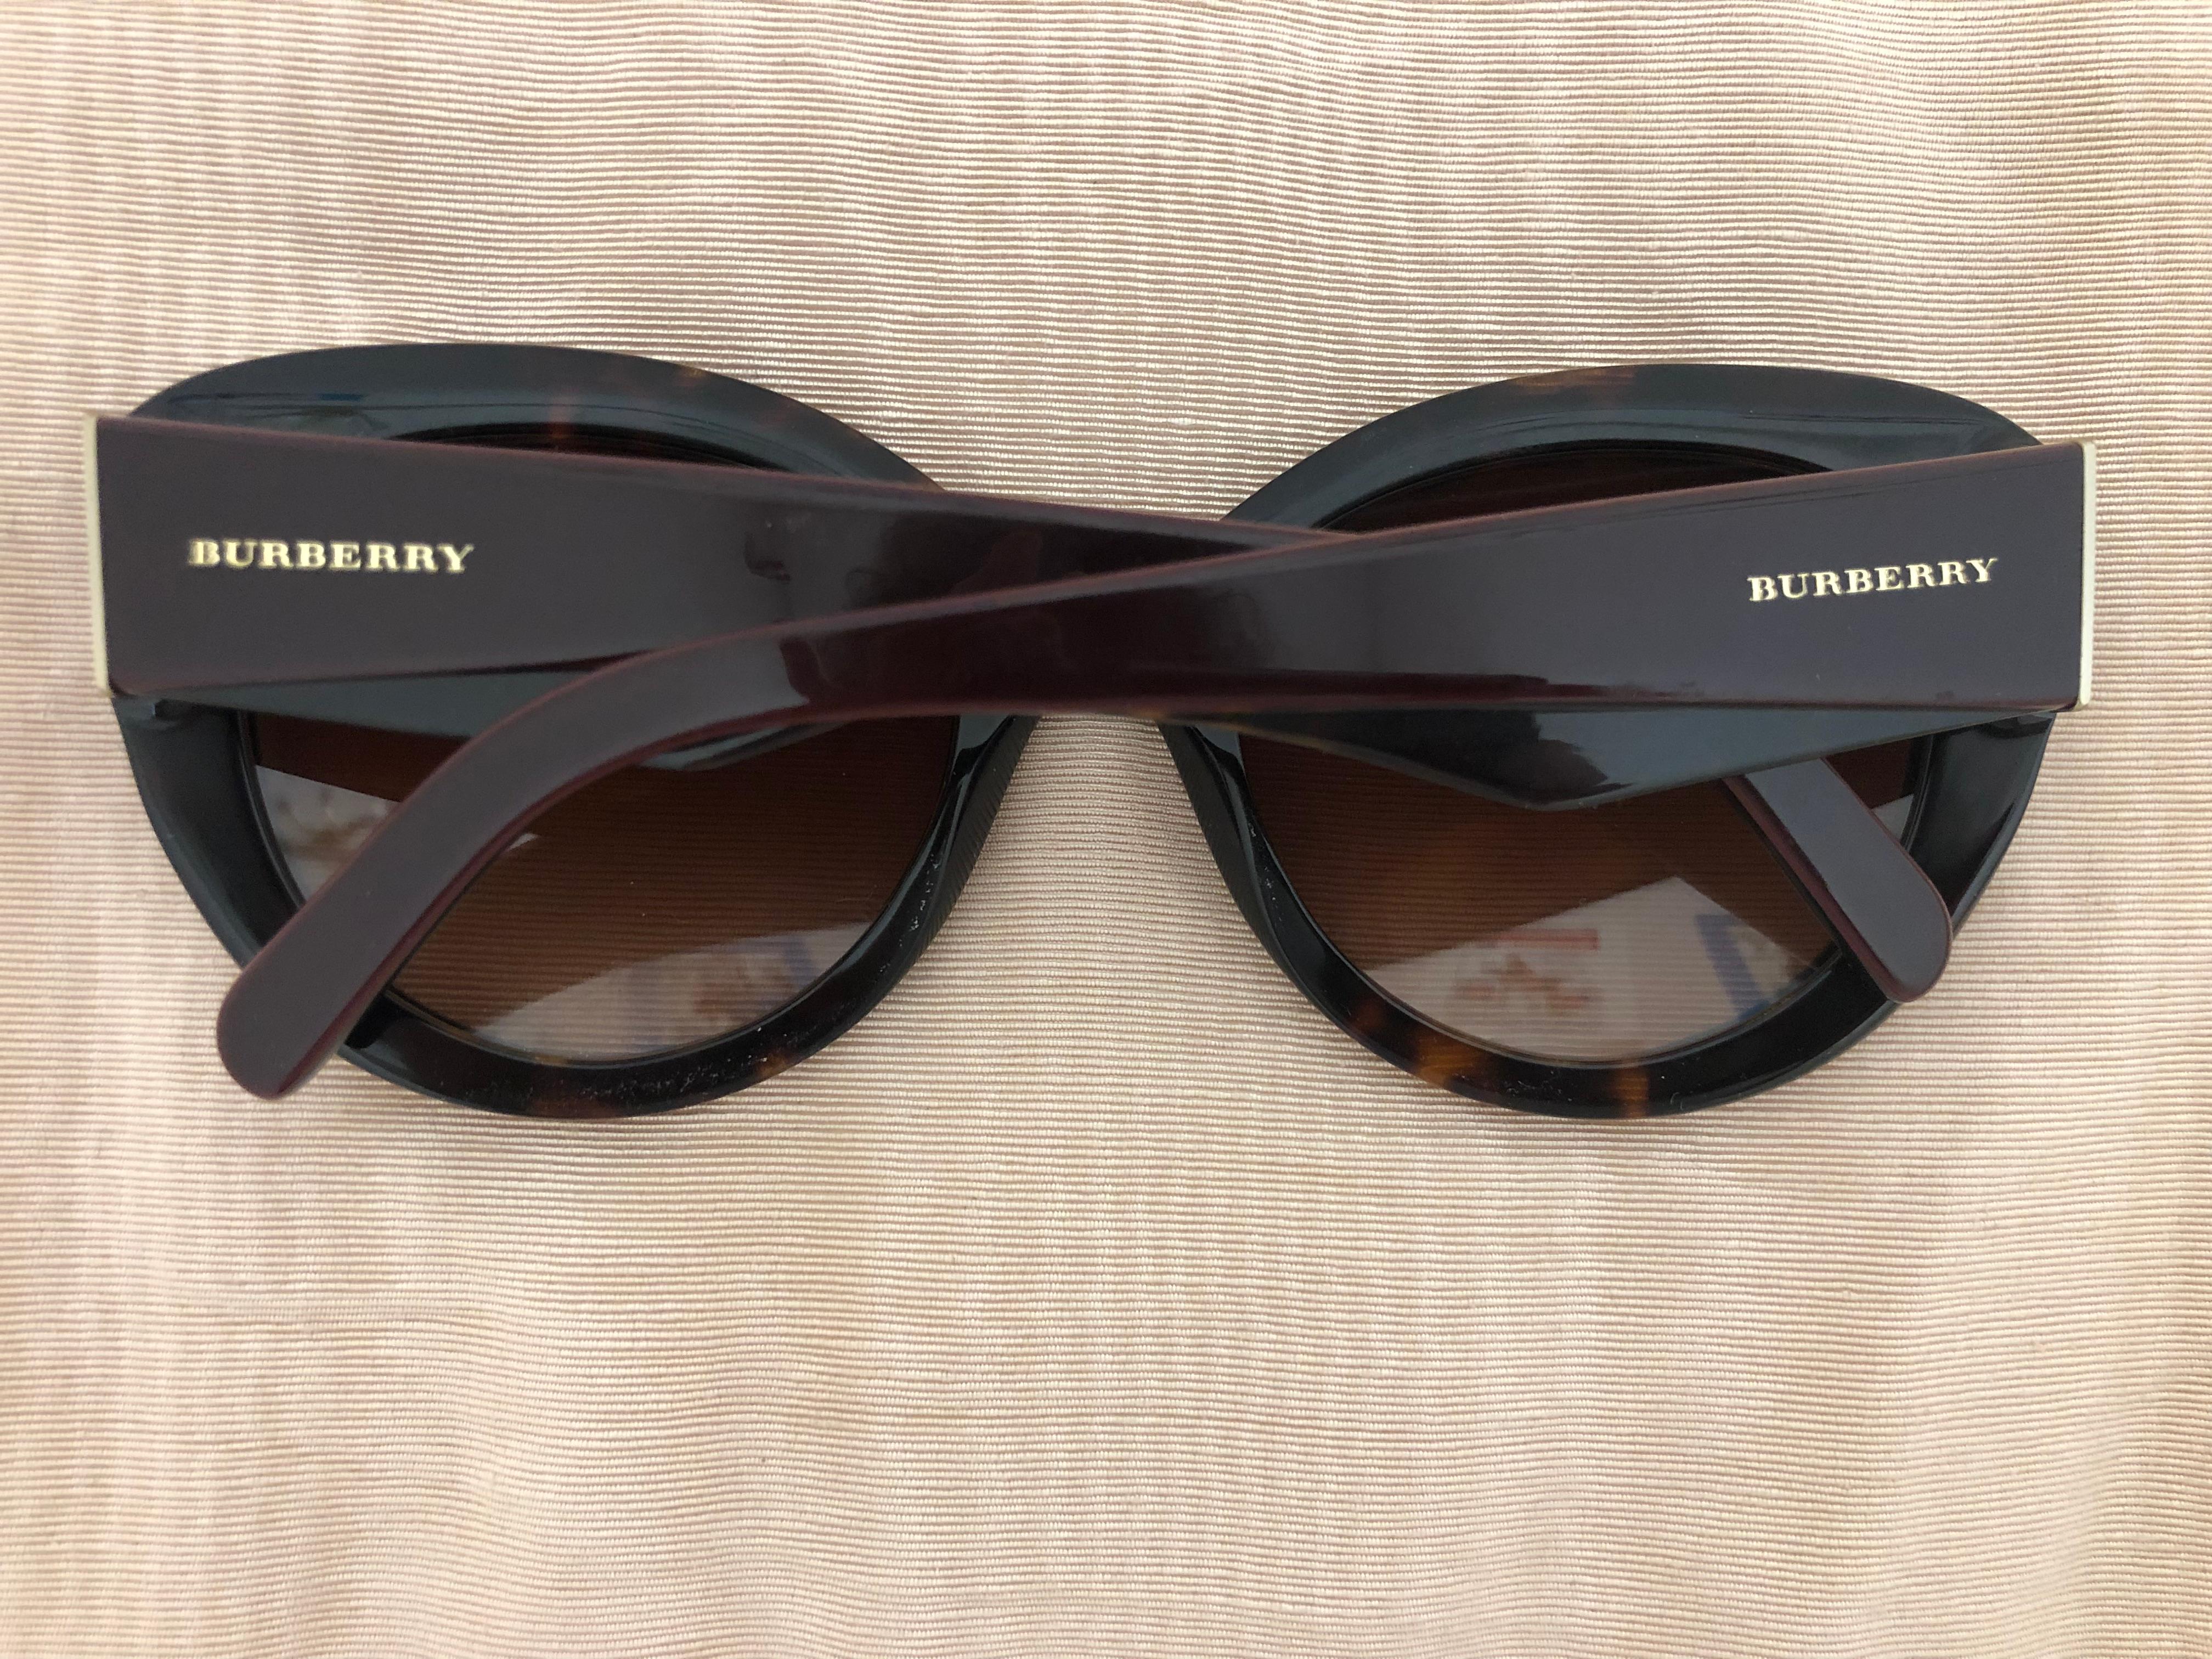 These are Bordeaux Havana sunglasses made in Italy. The glossy Bordeaux contrast very nicely with the dark Havana. The lenses are brown gradient UV protection and the arms sport the Burberry inscription.